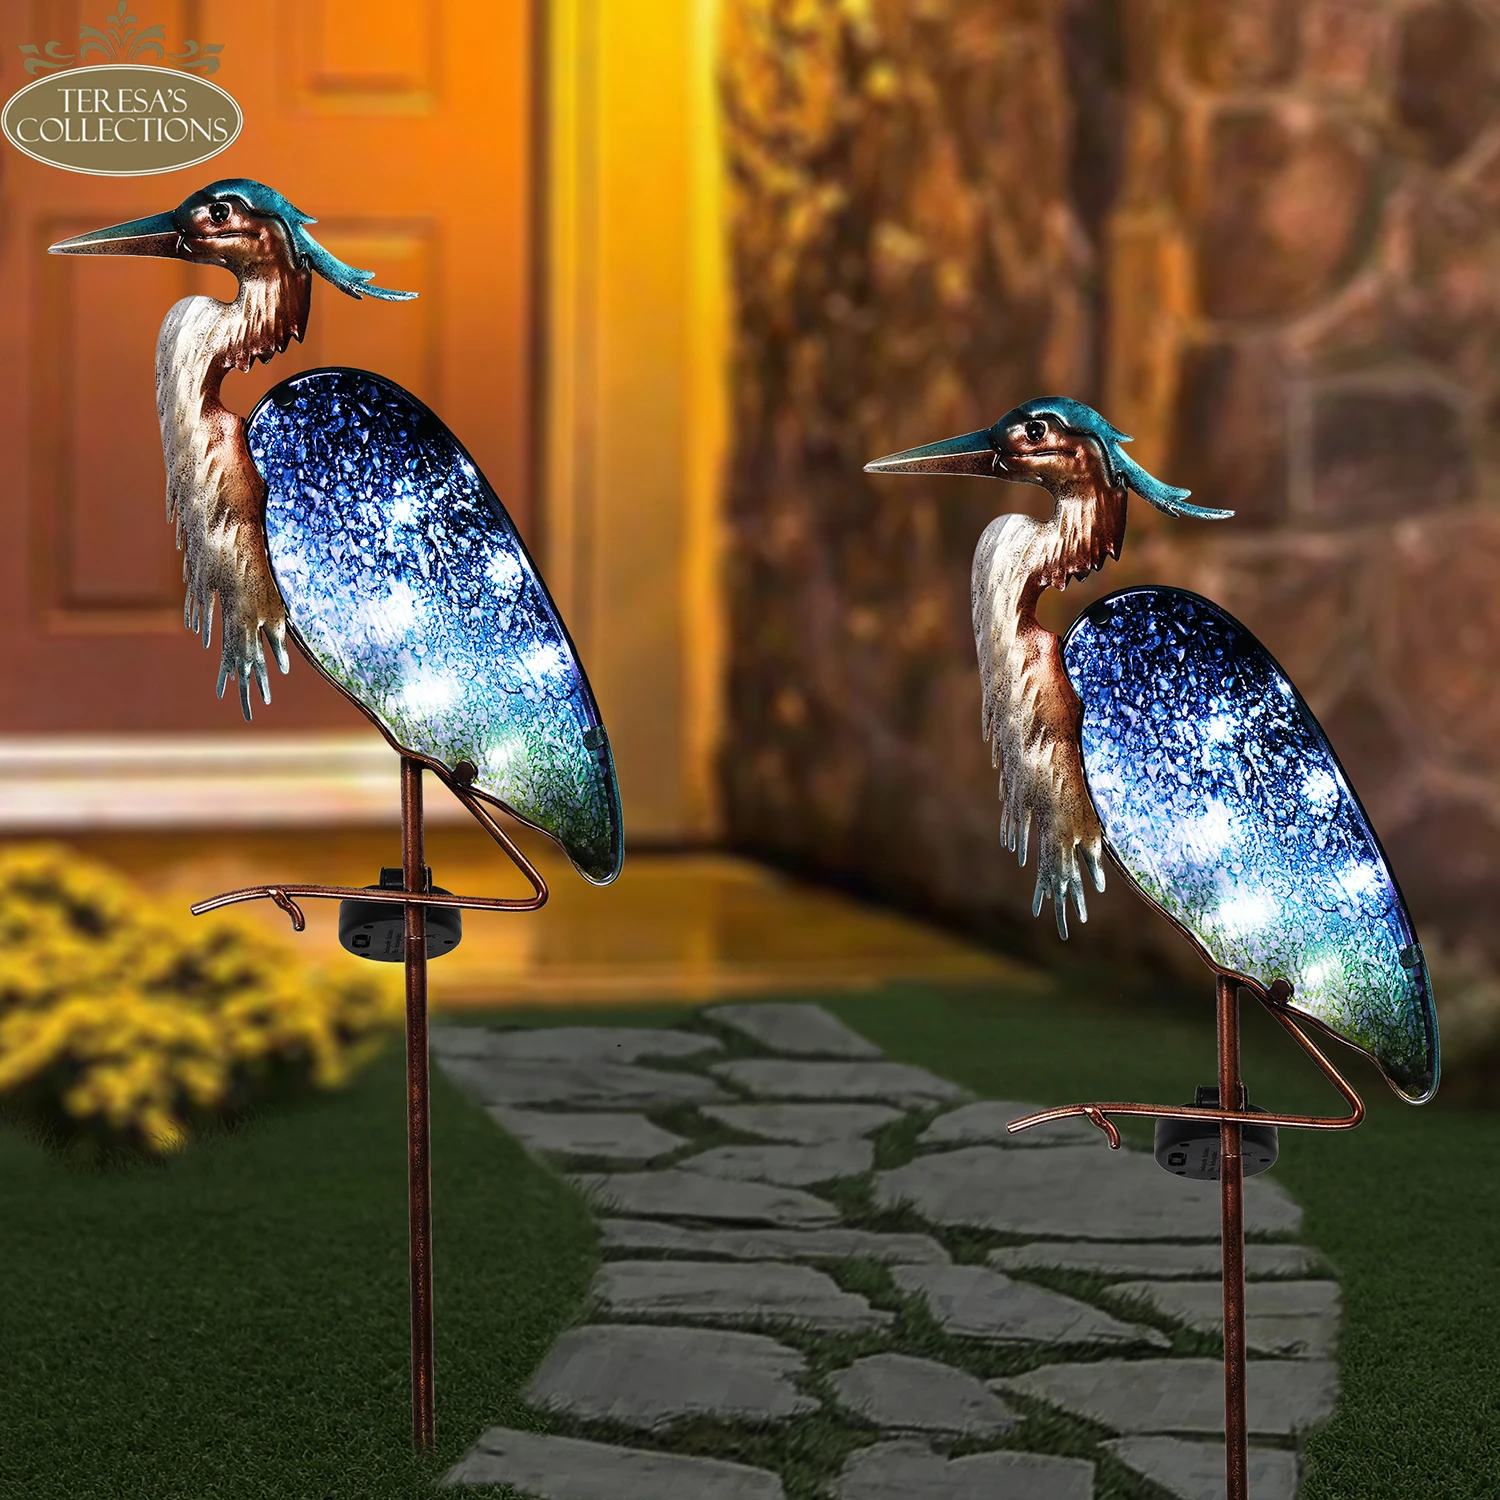 

TERESA'S COLLECTIONS Garden Solar Light For Yard Heron Stake LED Lamp Statues Lawn Path Landscape Outdoor Courtyard Decoration